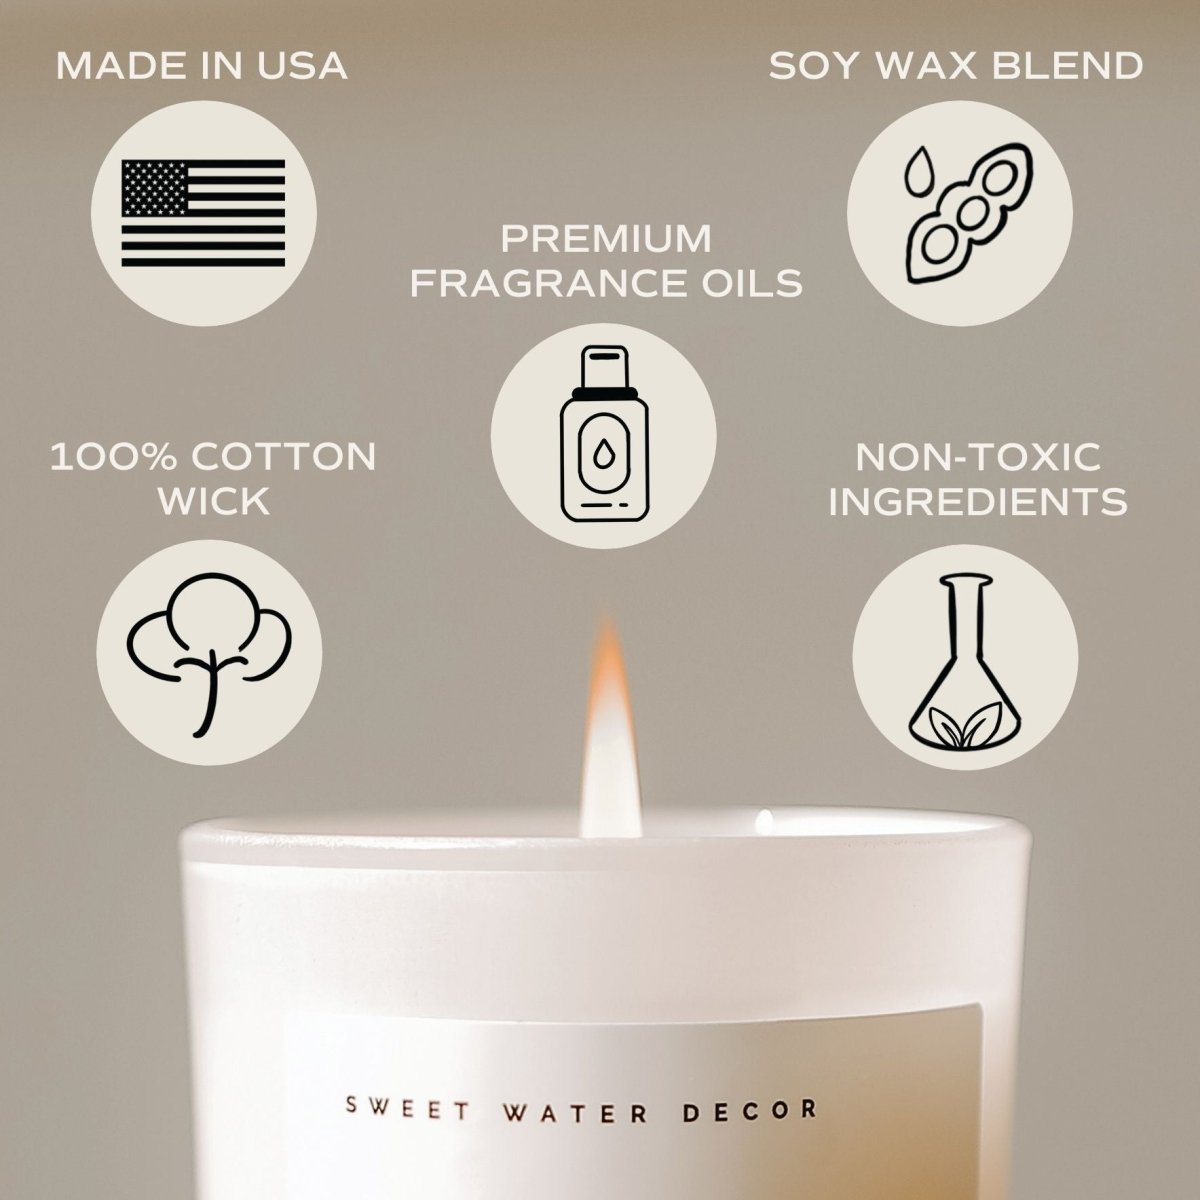 Load image into Gallery viewer, Sweet Water Decor Weekend Soy Candle - White Jar - 11 oz - lily &amp;amp; onyx
